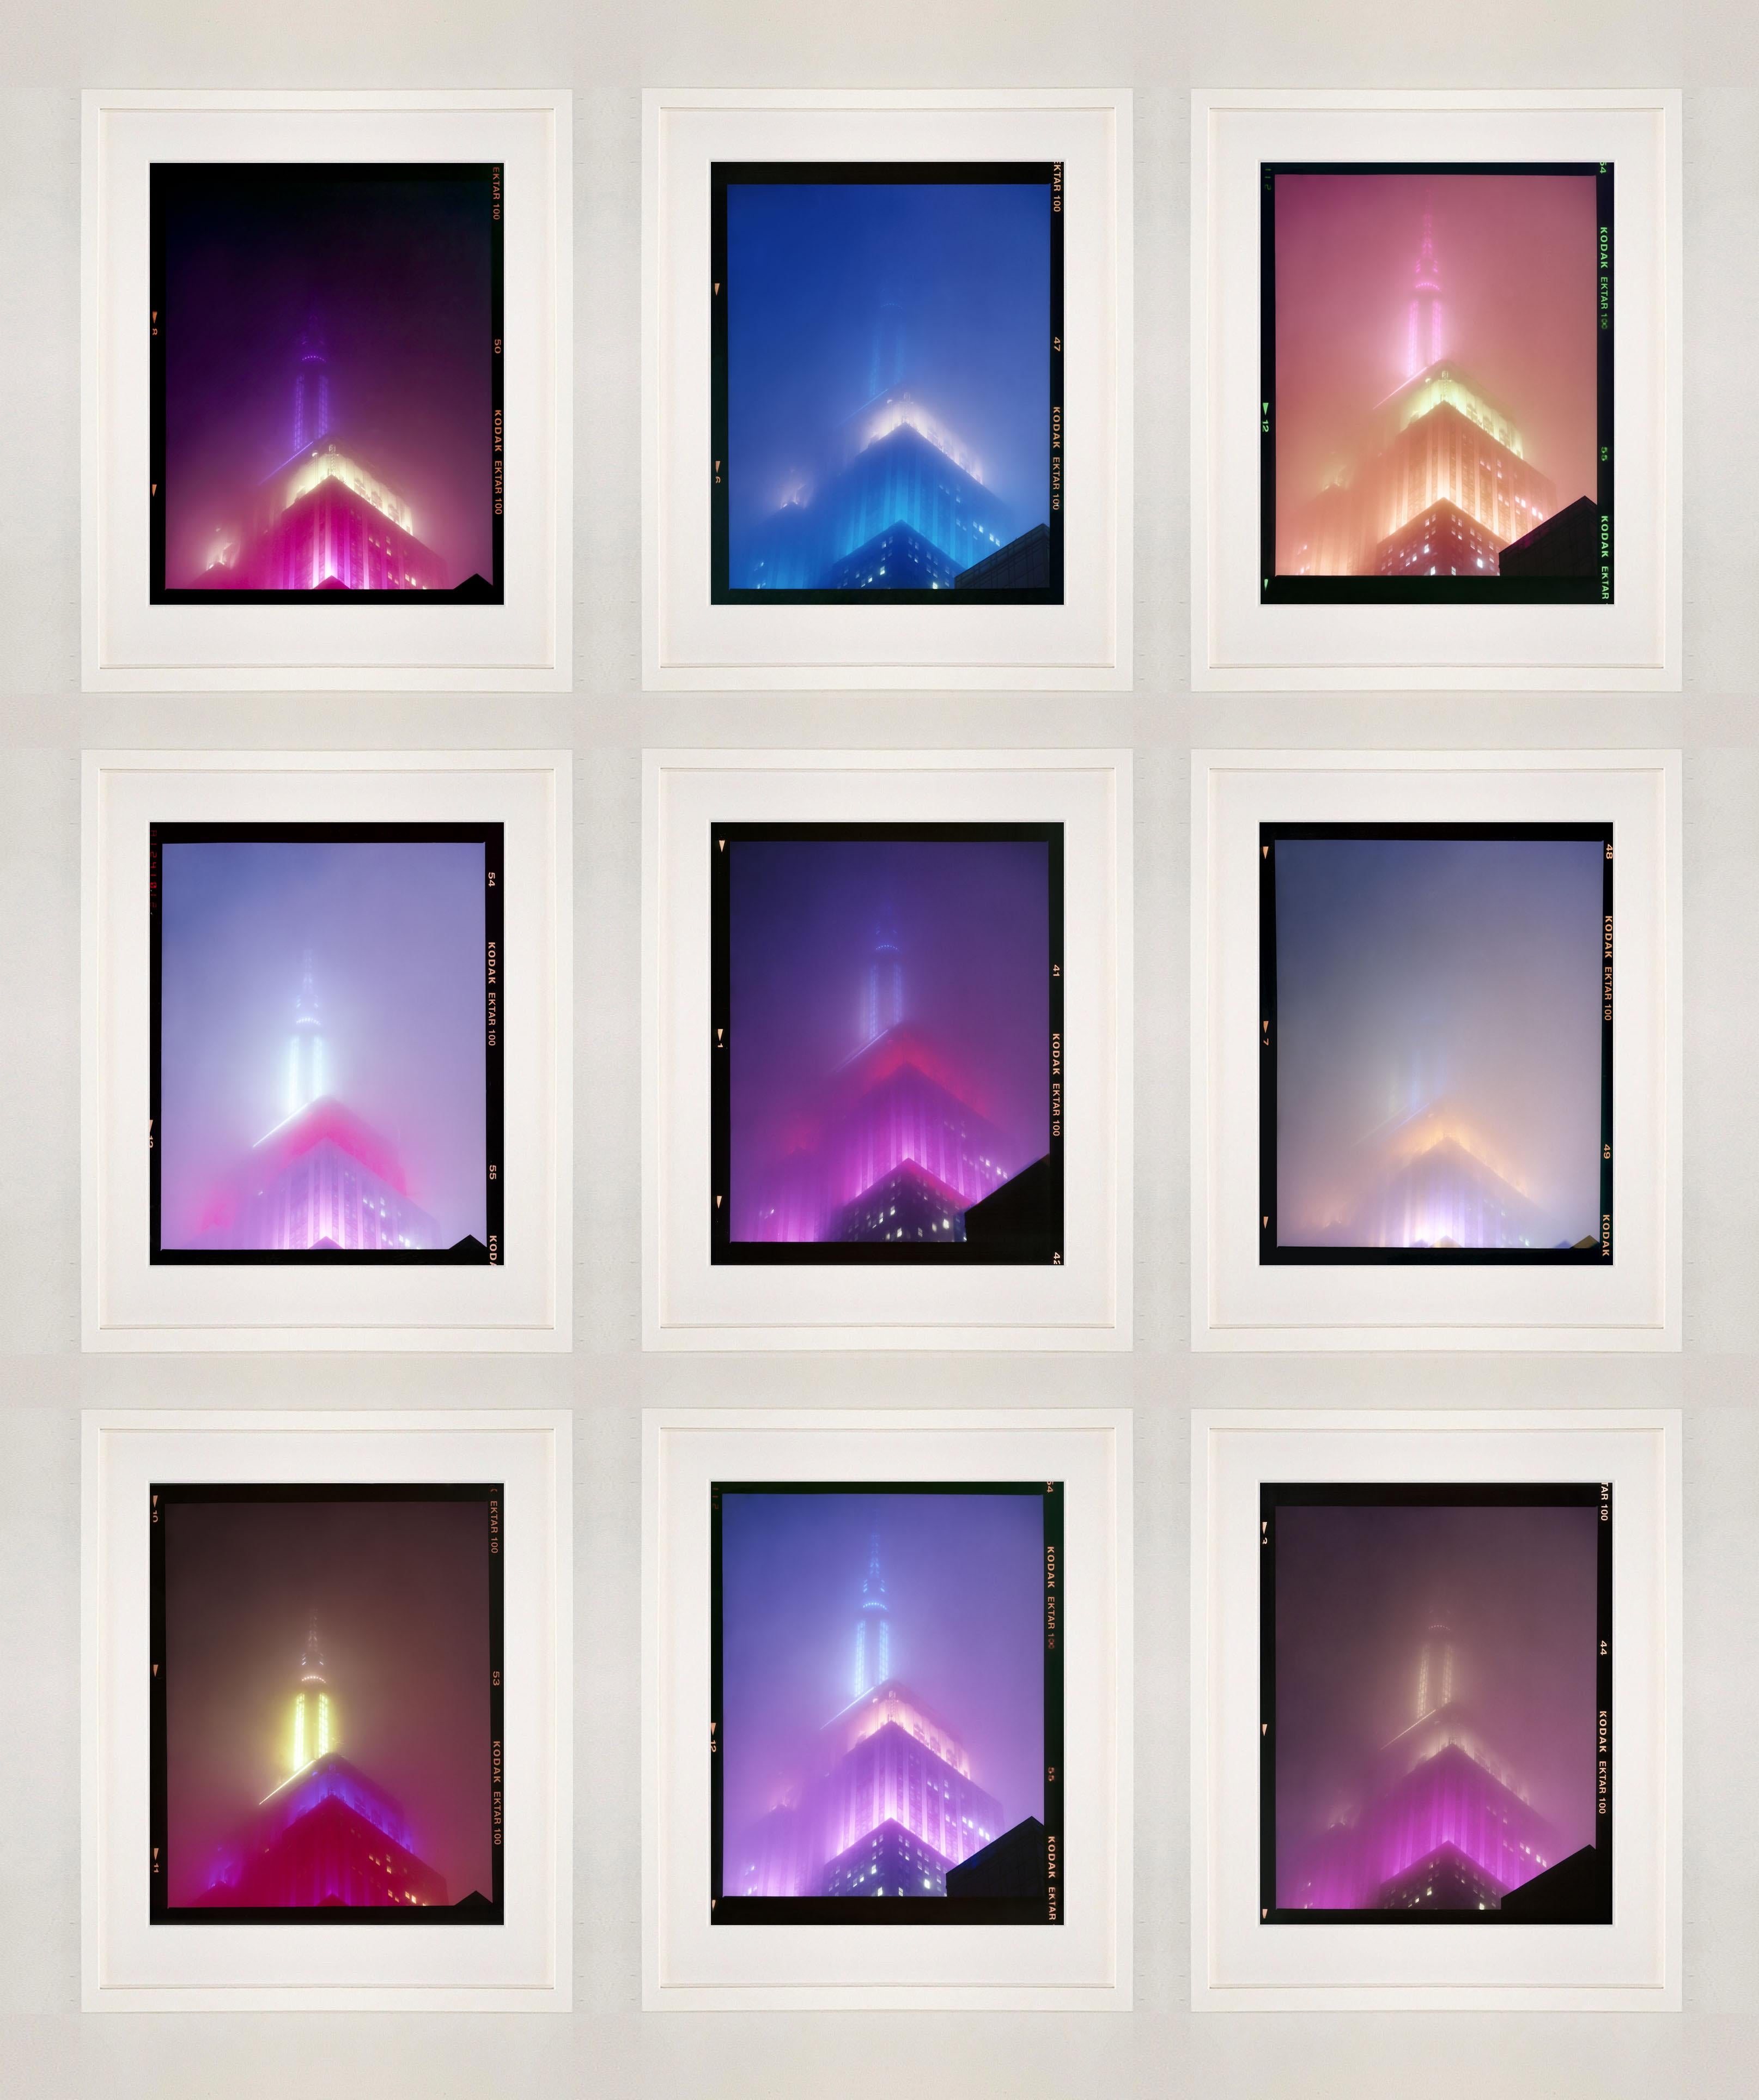 'NOMAD I (Film Rebate)', New York. Richard Heeps has photographed the iconic Empire State building in the mist. The NOMAD sequence of photographs capture the art deco architecture illuminated by changing colours, and is part of Richard's street